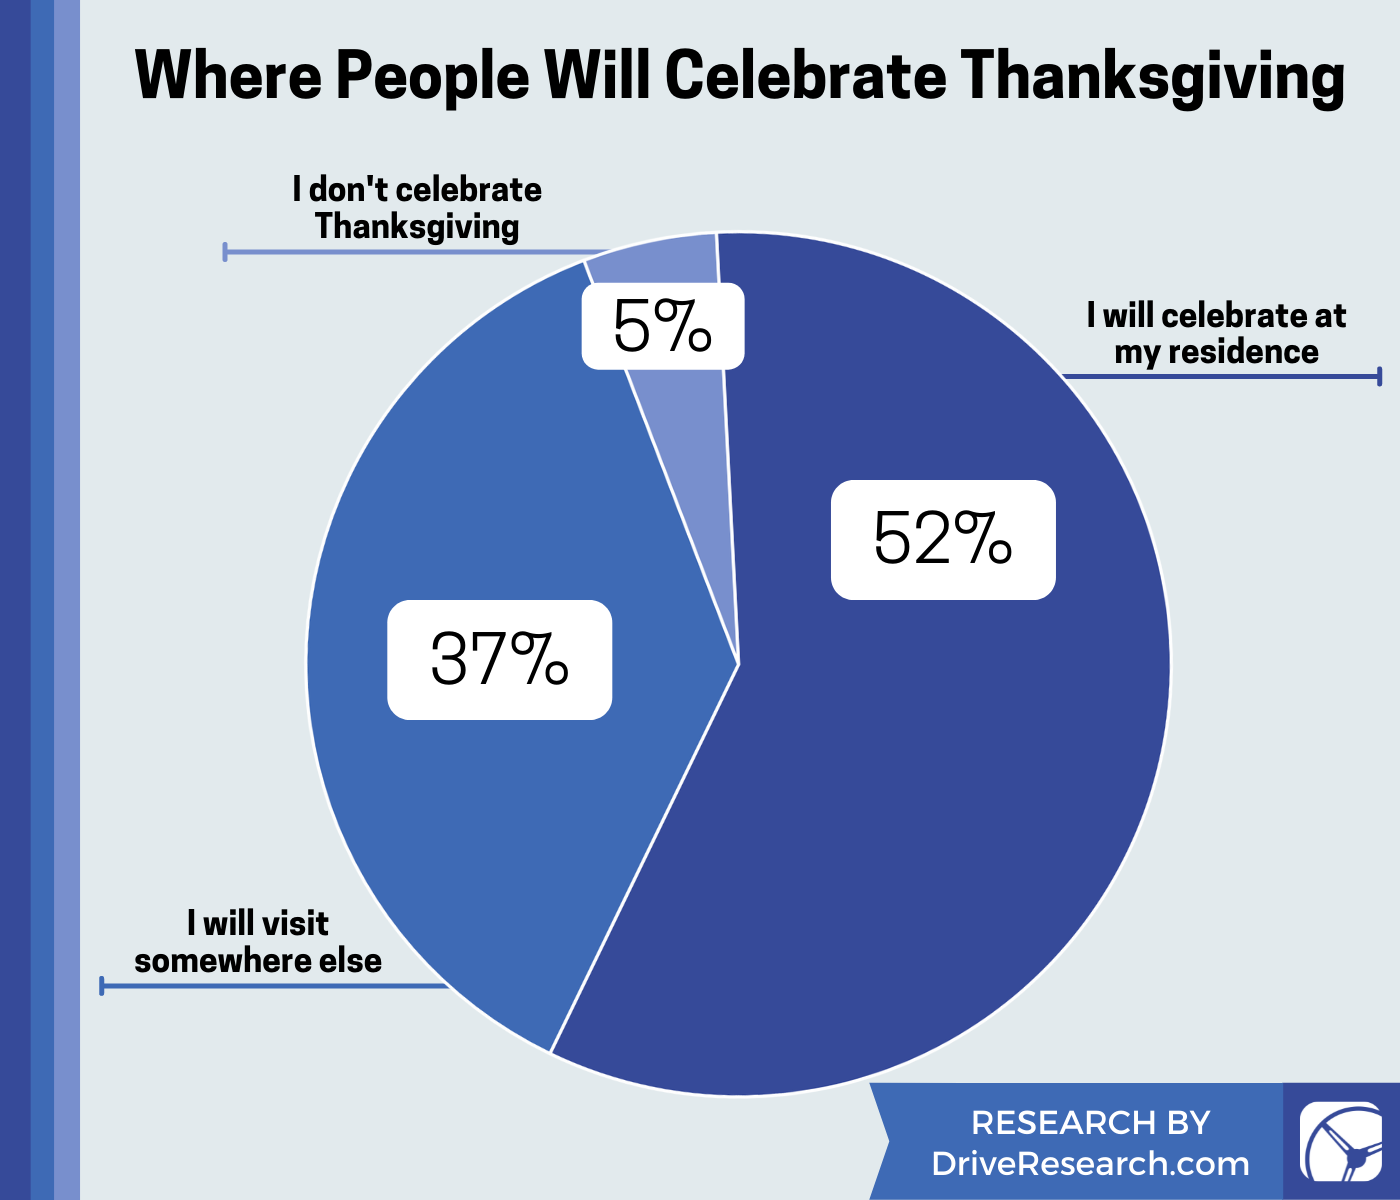 CHART: Nearly 3 in 5 people will celebrate Thanksgiving at their own residence.